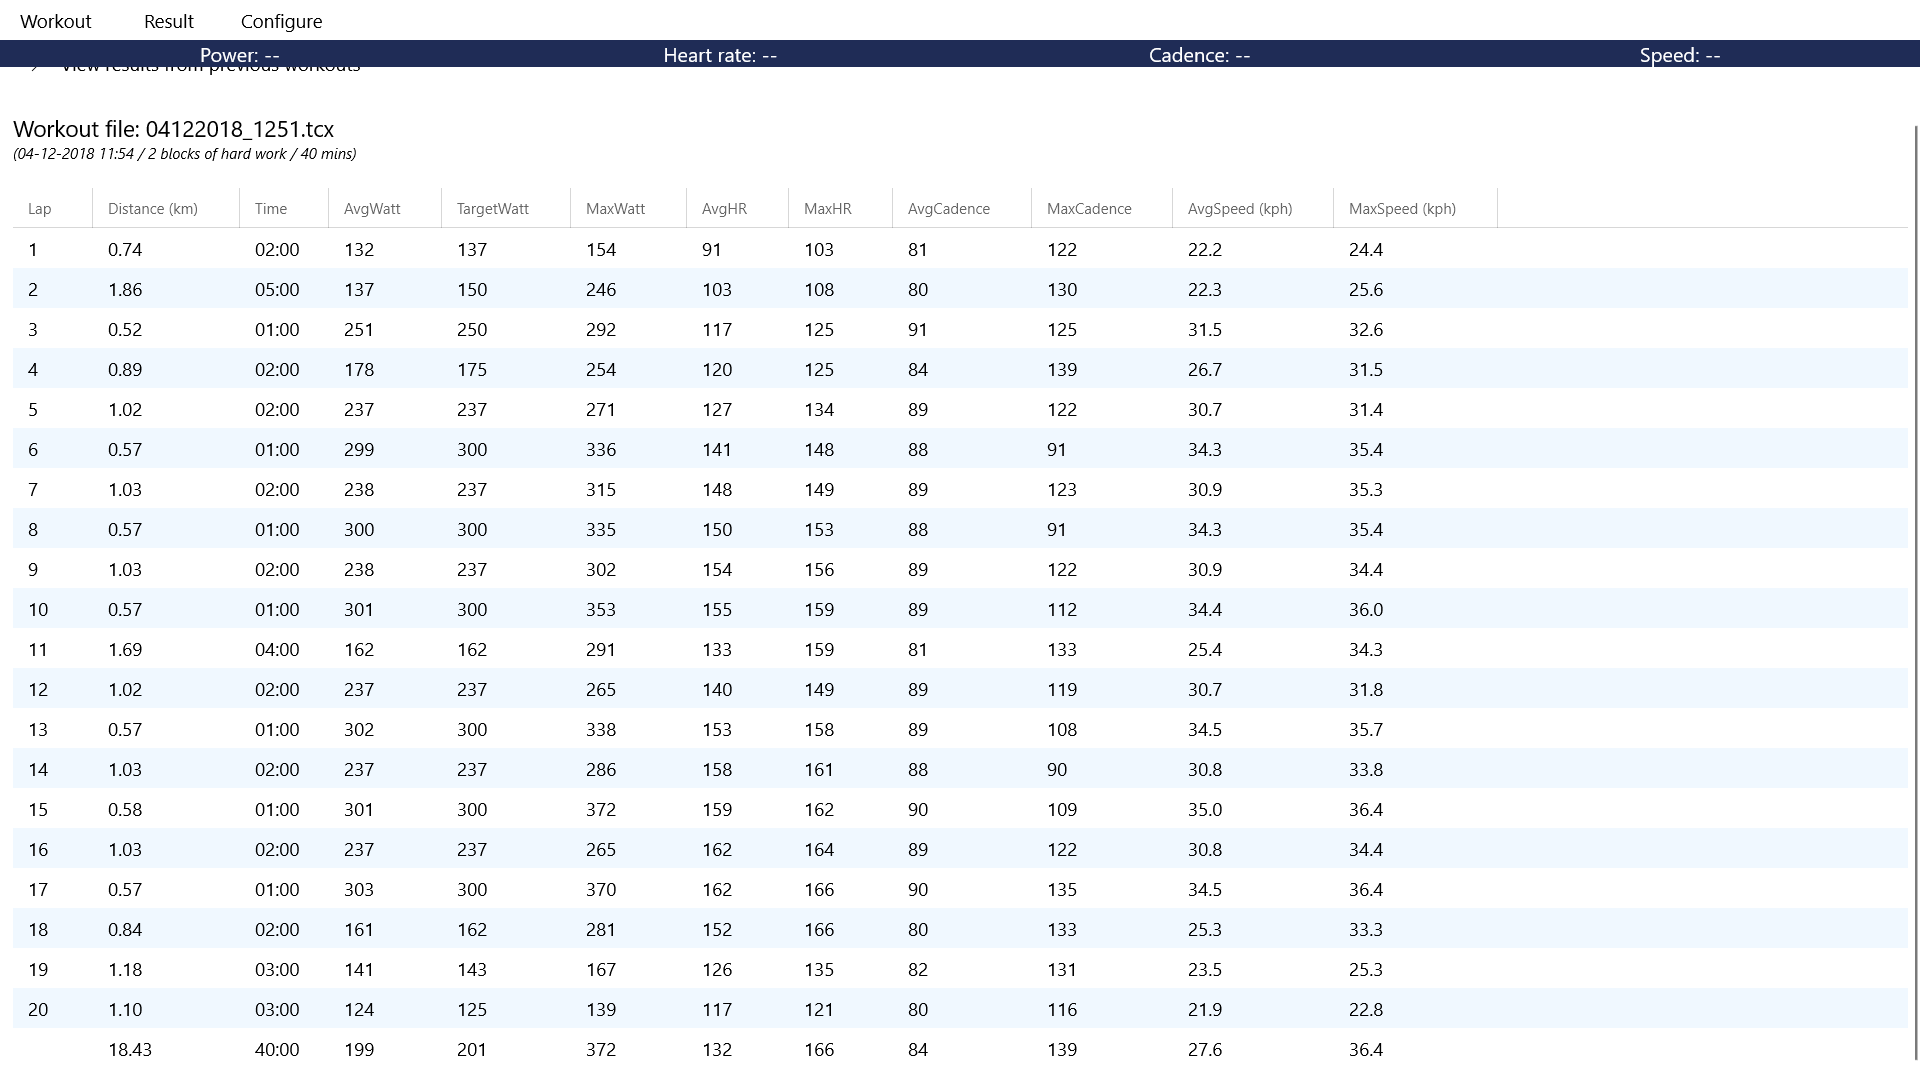 View detailed performance data after your workout